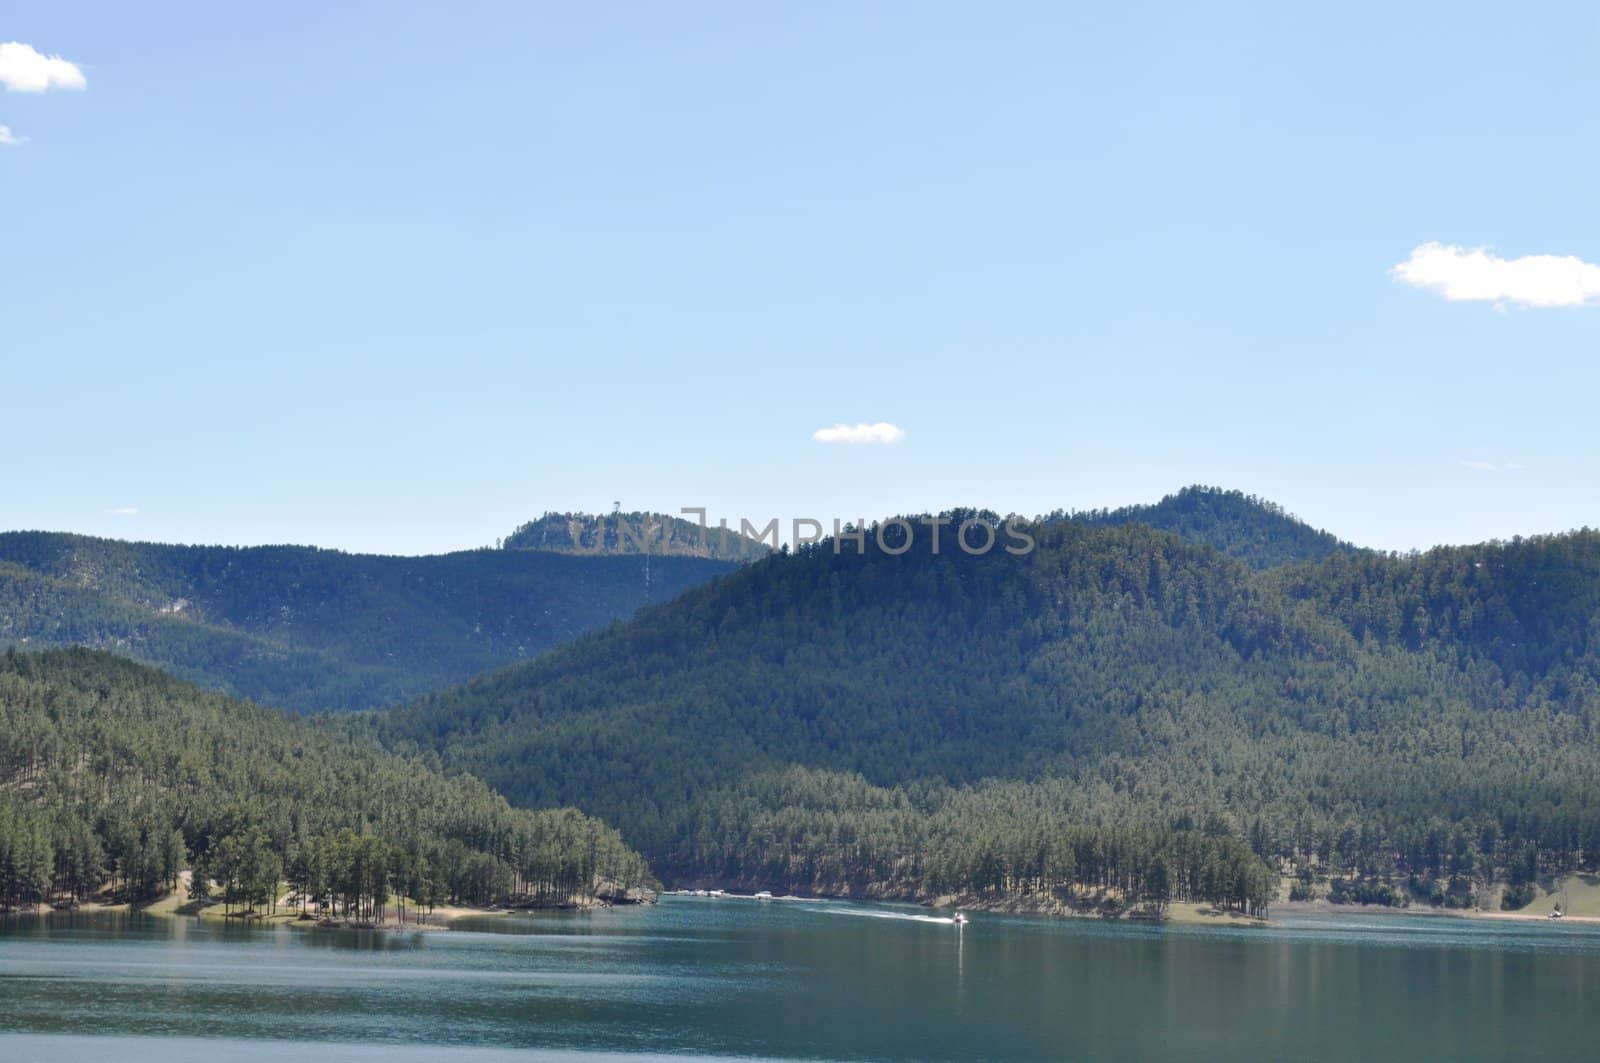 Black hills and water background by RefocusPhoto